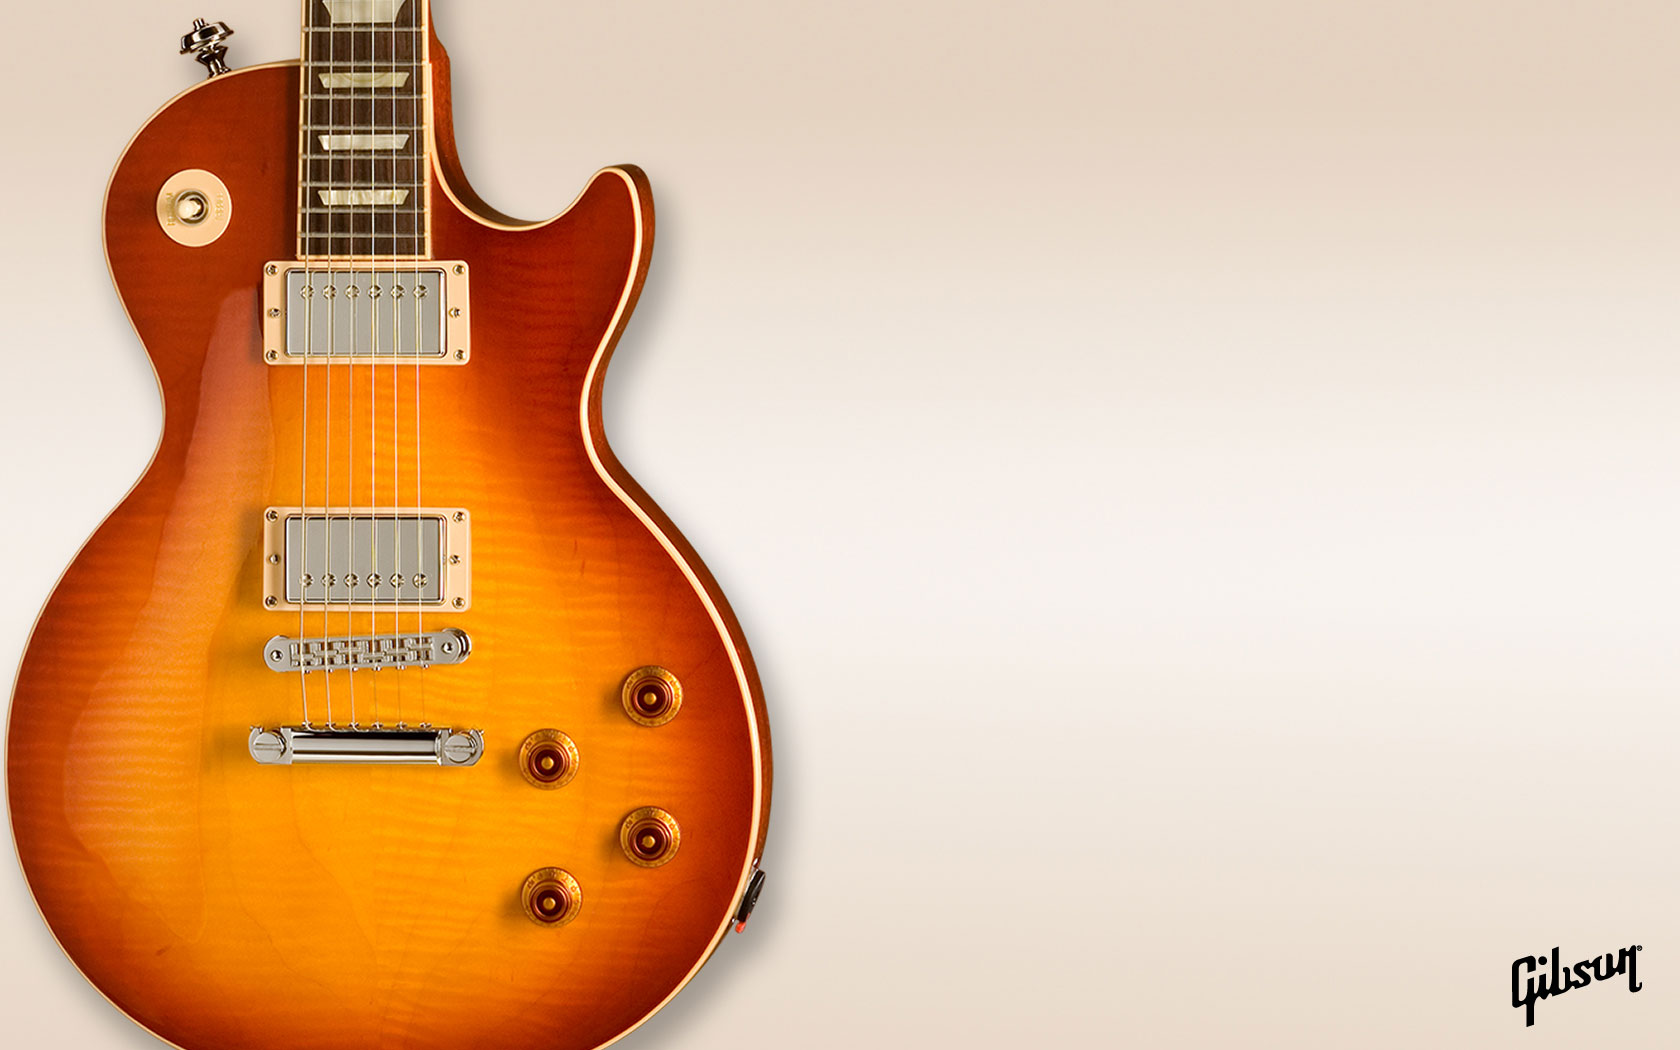 HD Gibson Guitar Wallpapers and Photos | HD Music Wallpapers